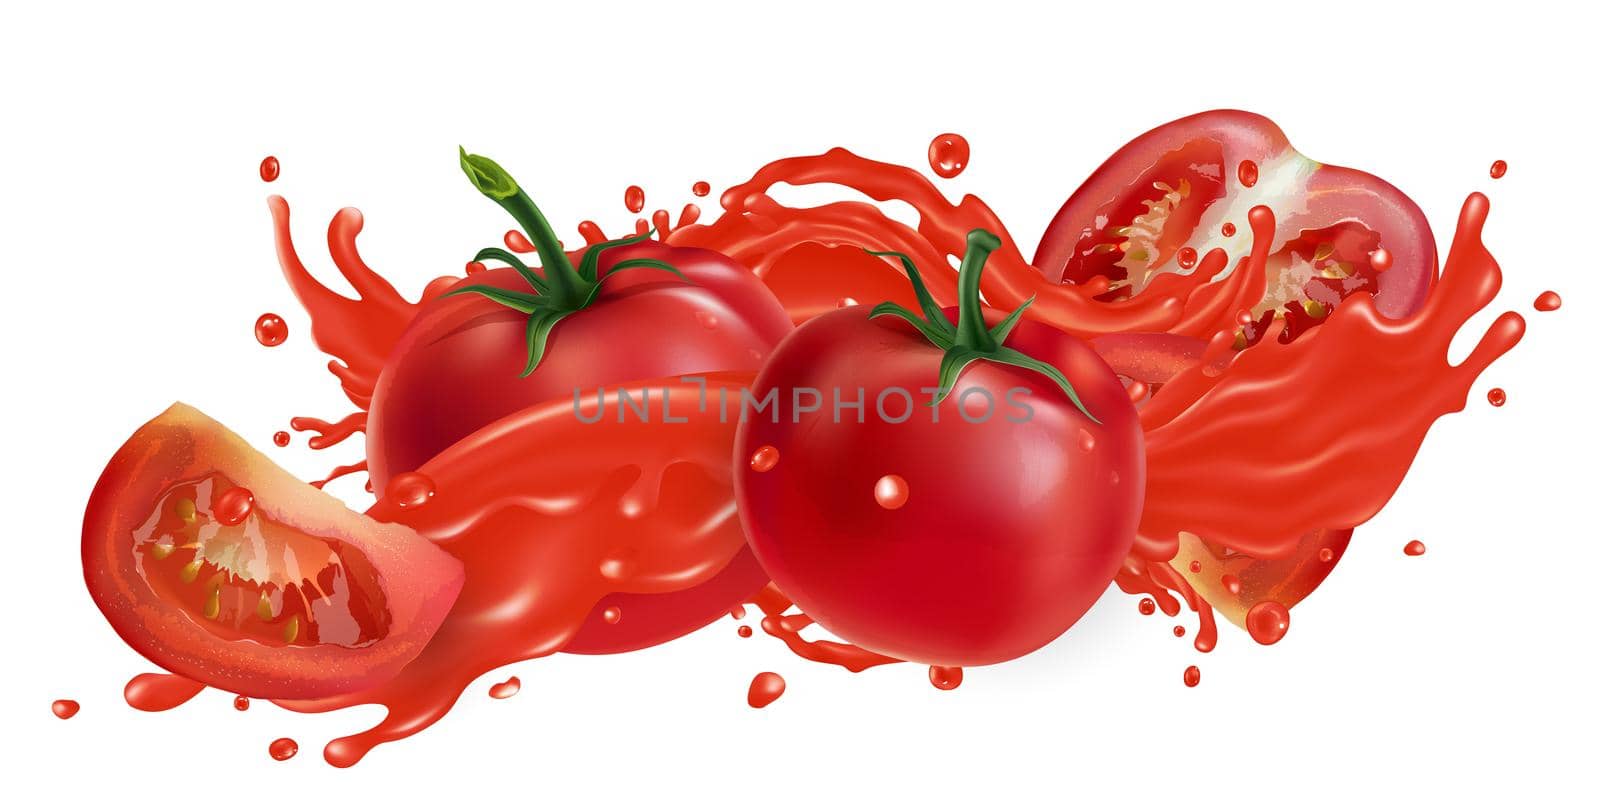 Whole and sliced tomatoes and a splash of red vegetable juice on a white background. Realistic style illustration.